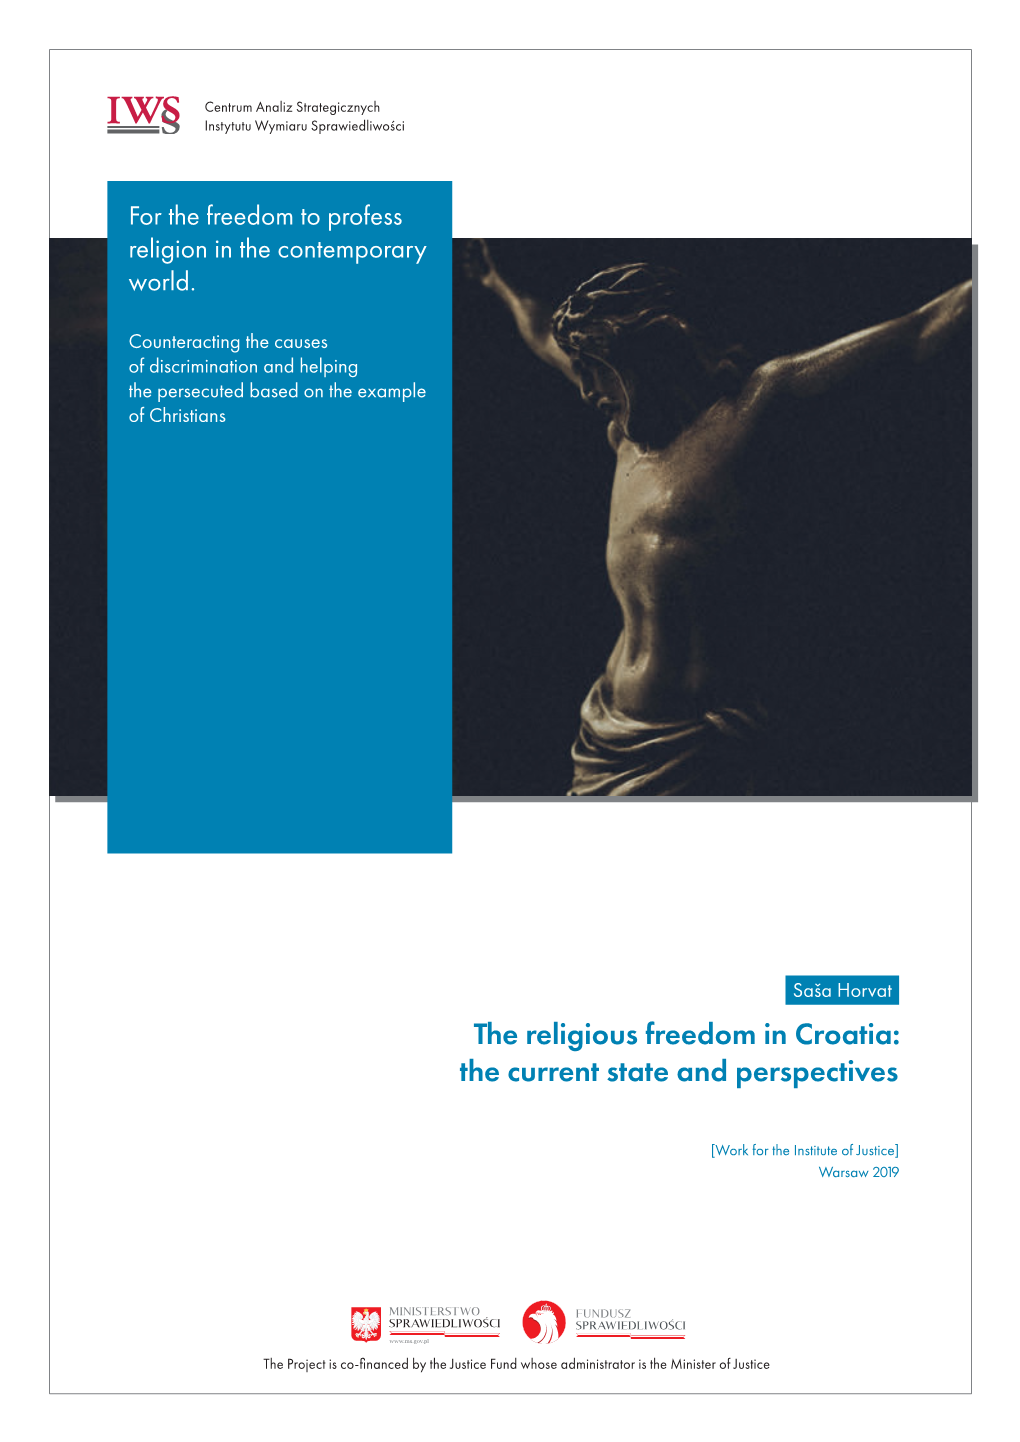 The Religious Freedom in Croatia: the Current State and Perspectives